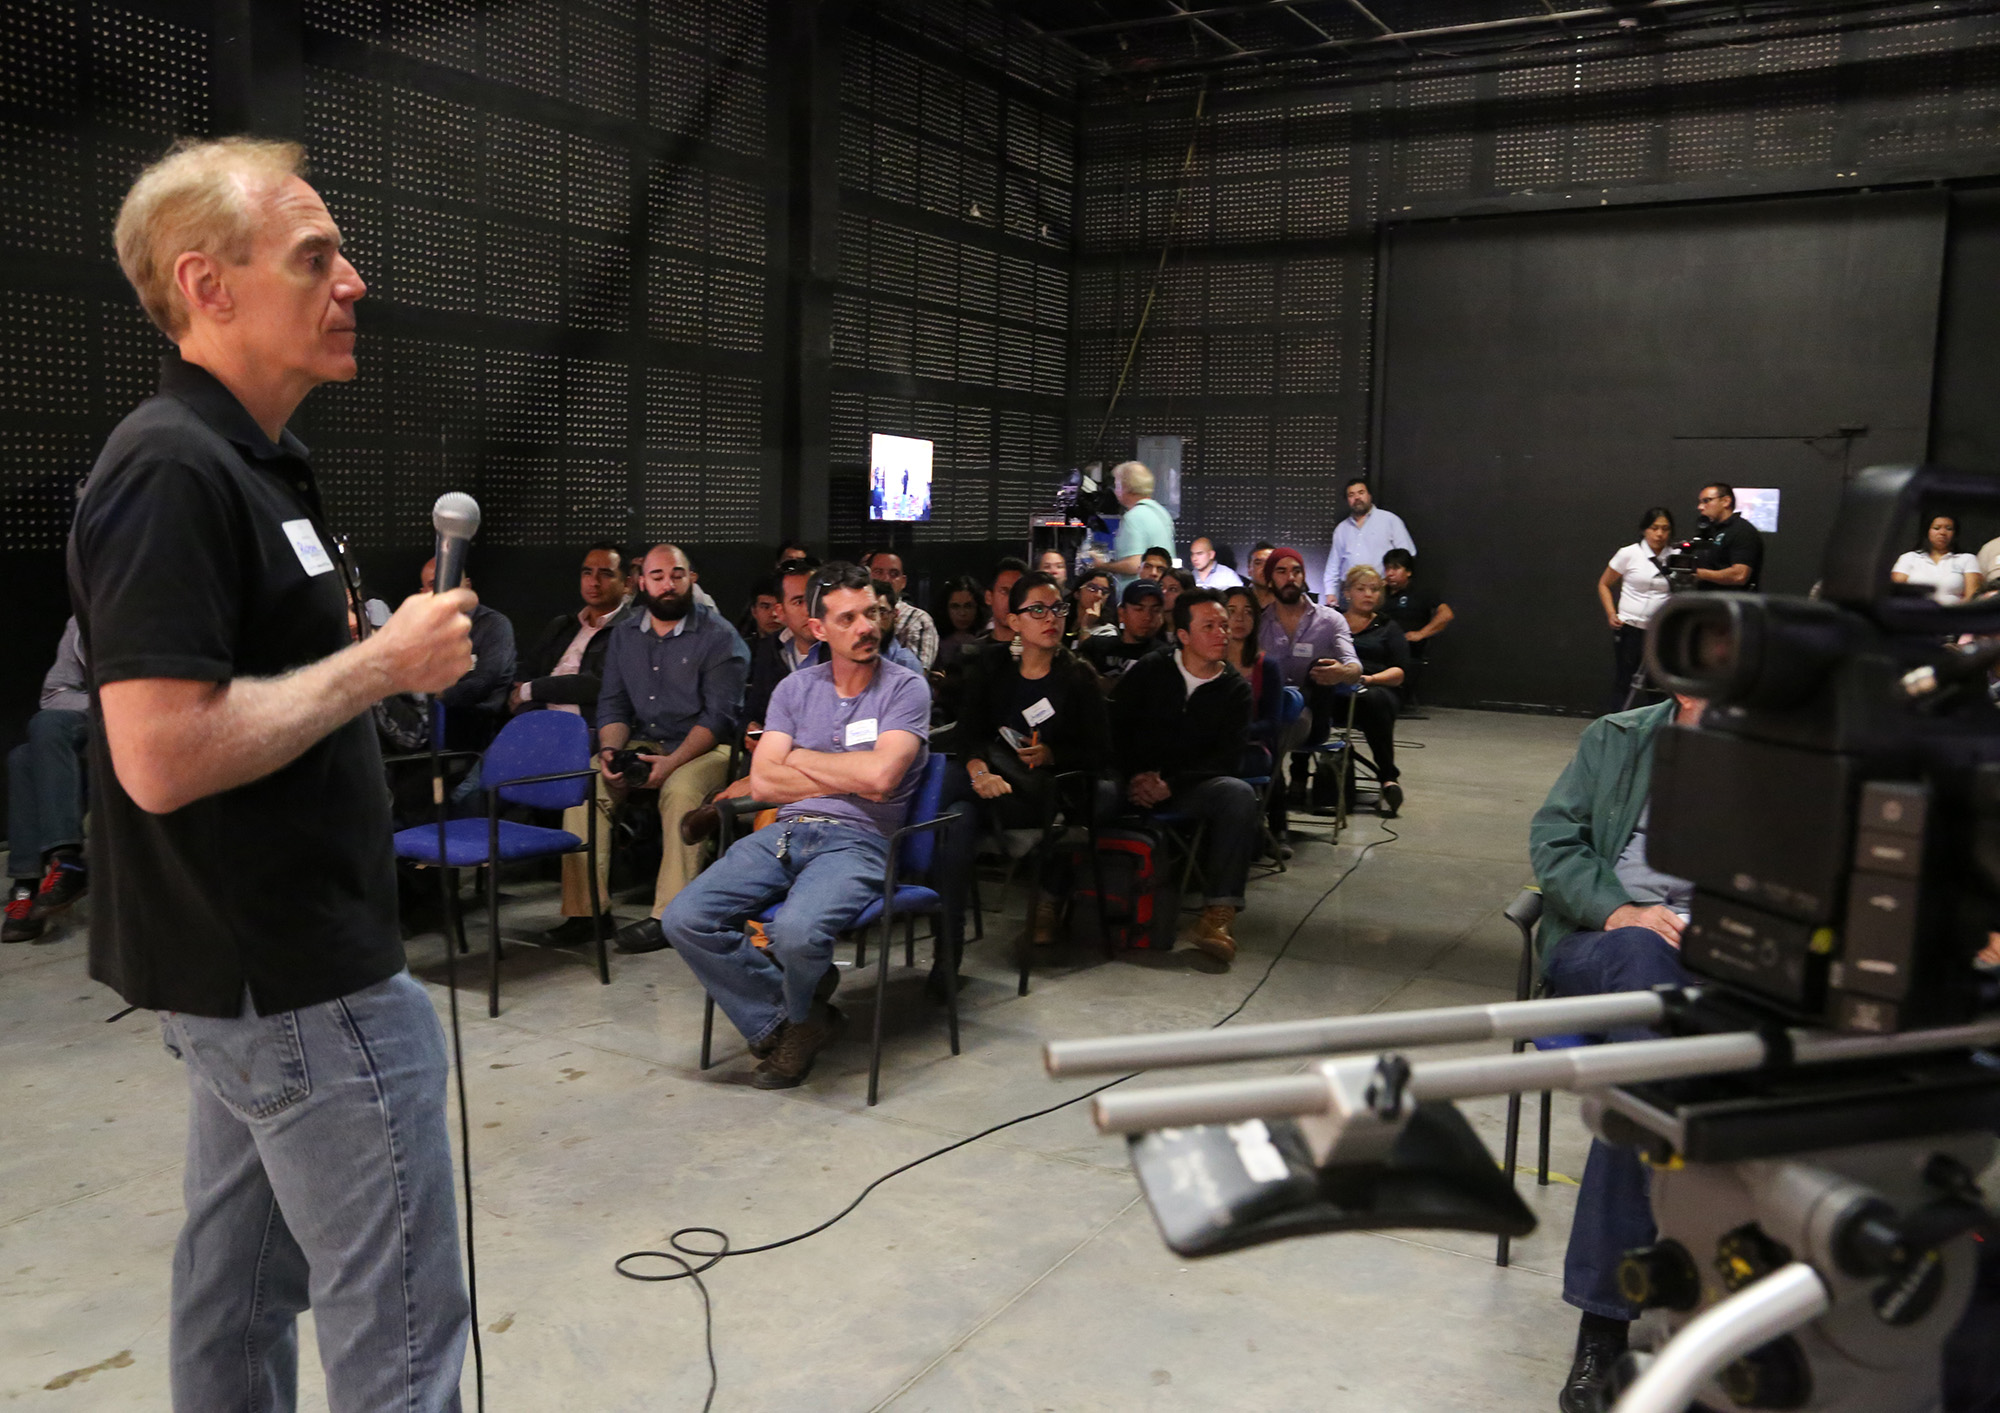 ASC President Richard Crudo takes questions from the audience. (Photo: Alex Beatty)